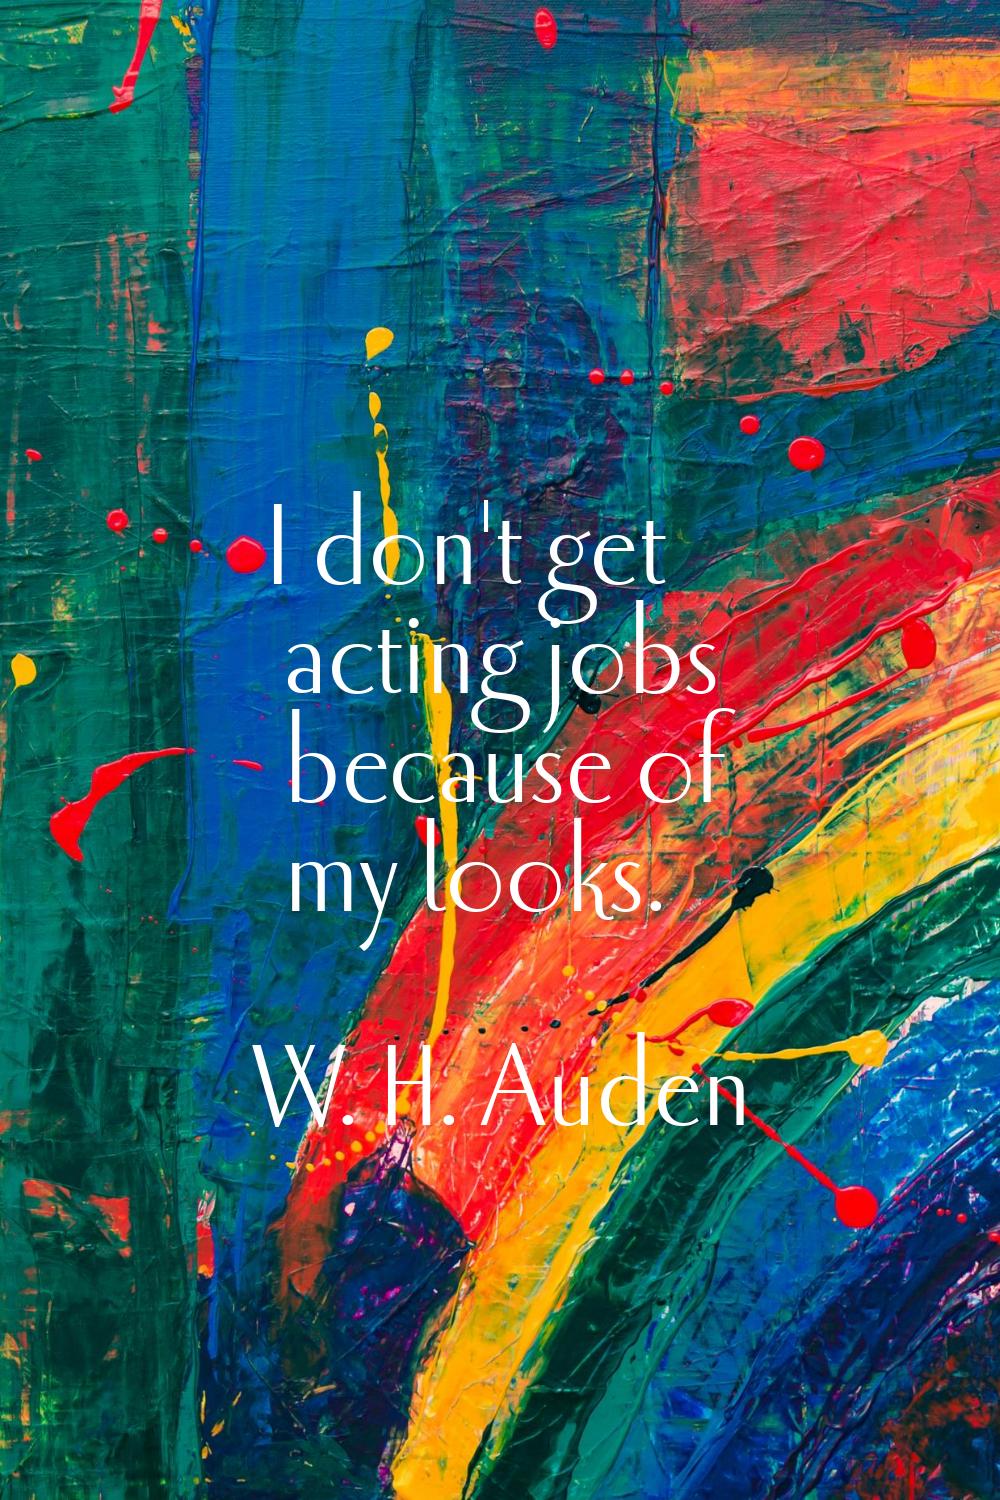 I don't get acting jobs because of my looks.